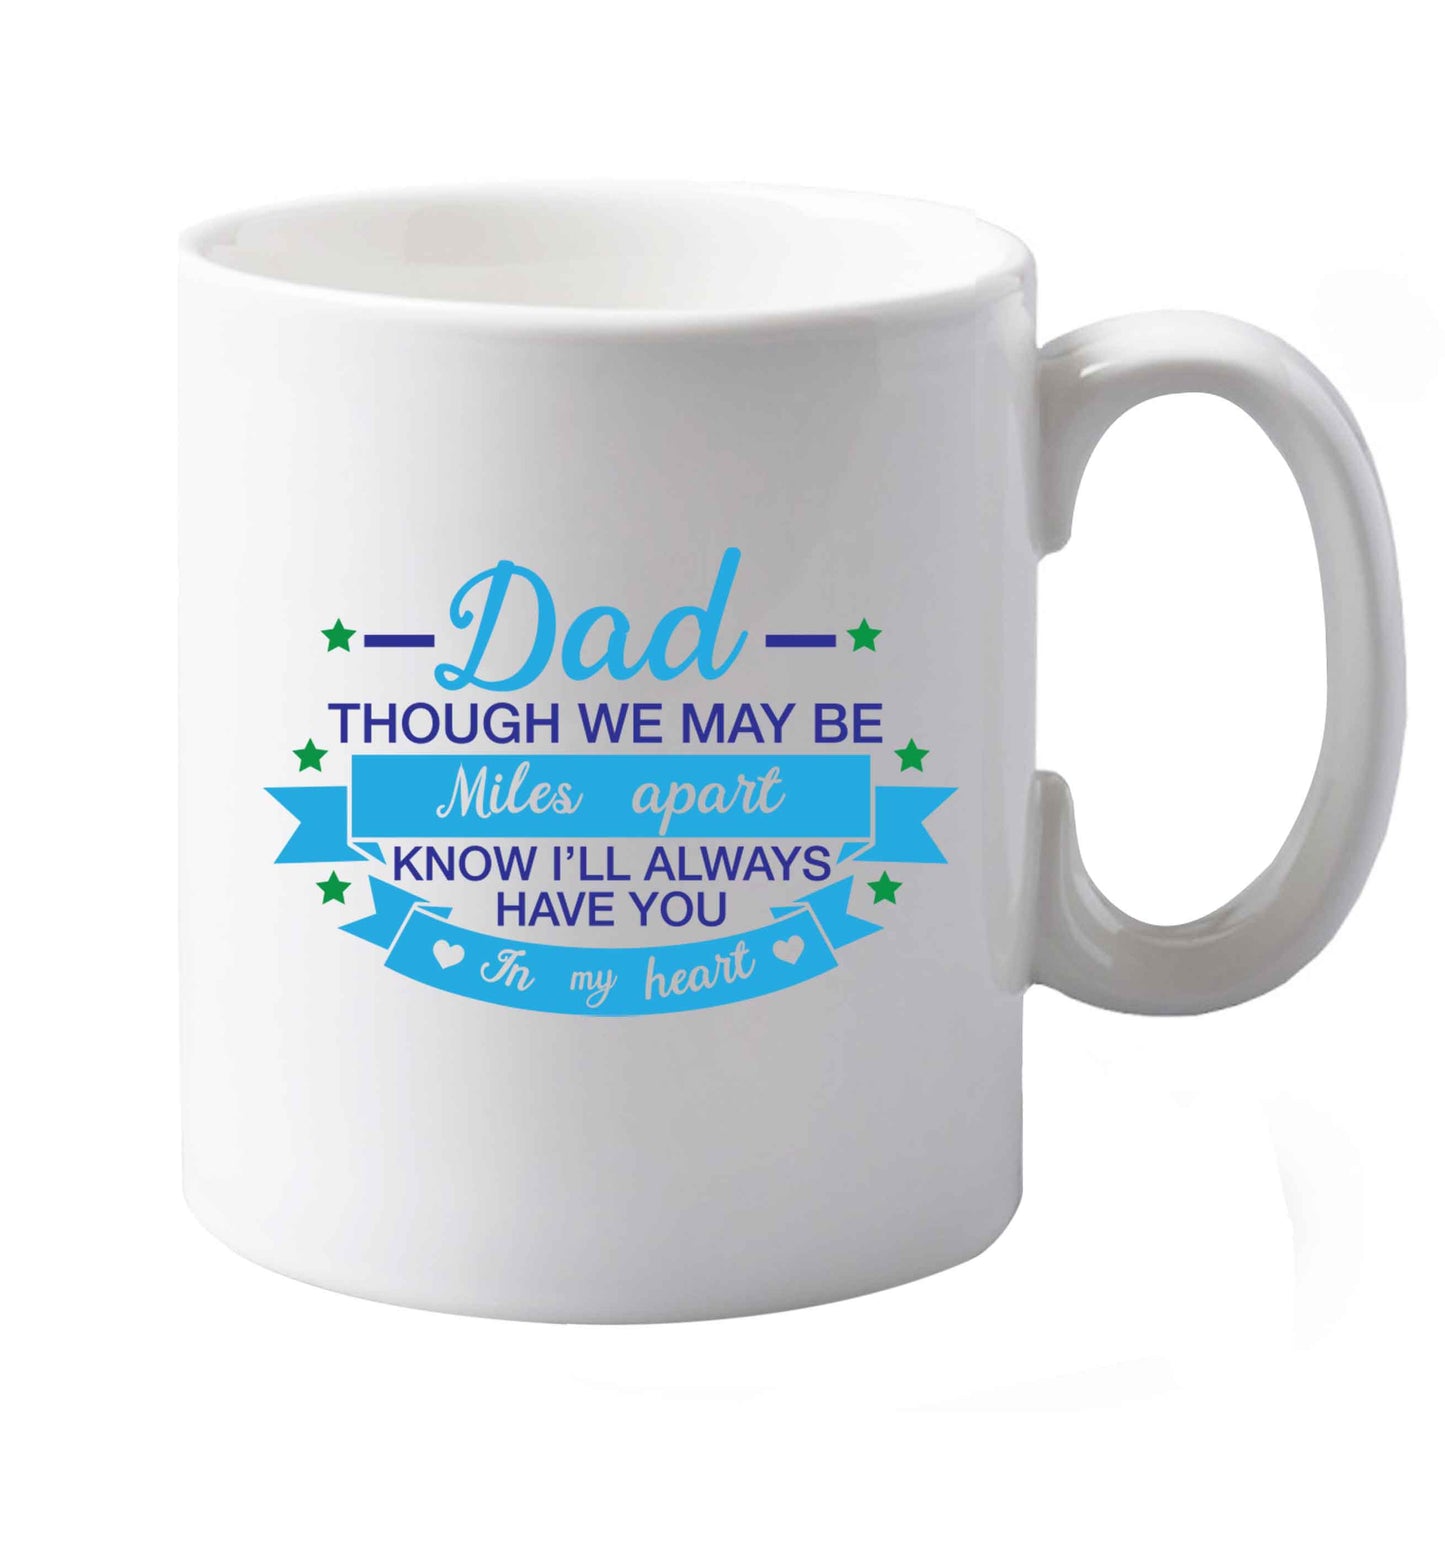 10 oz Dad though we are miles apart know I'll always have you in my heart ceramic mug both sides